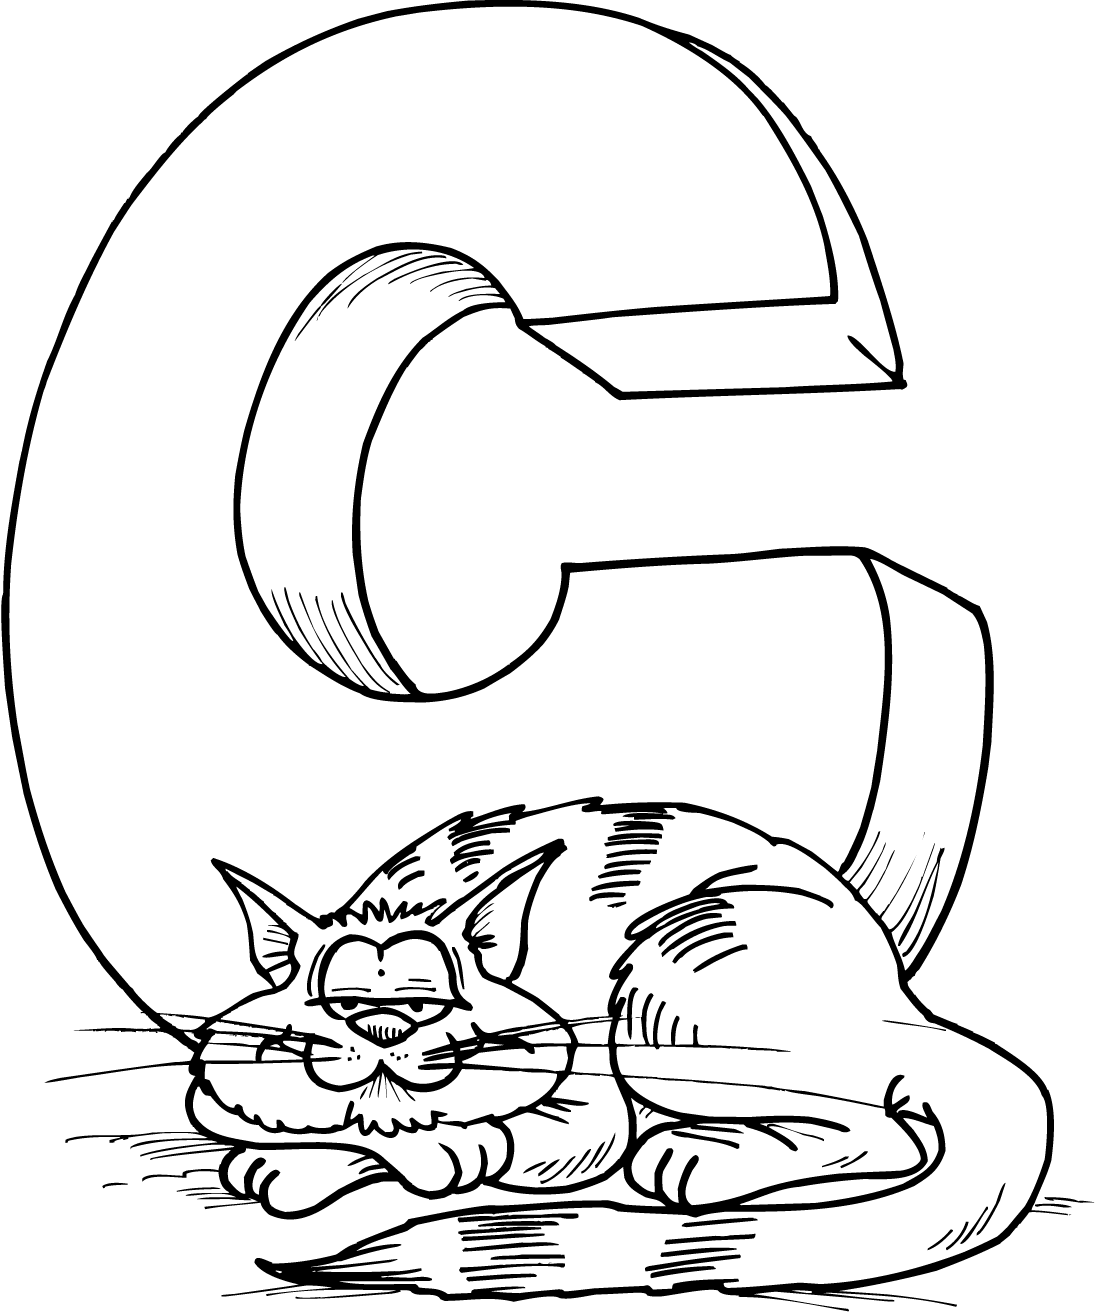 letter c coloring pages | Only Coloring Pages